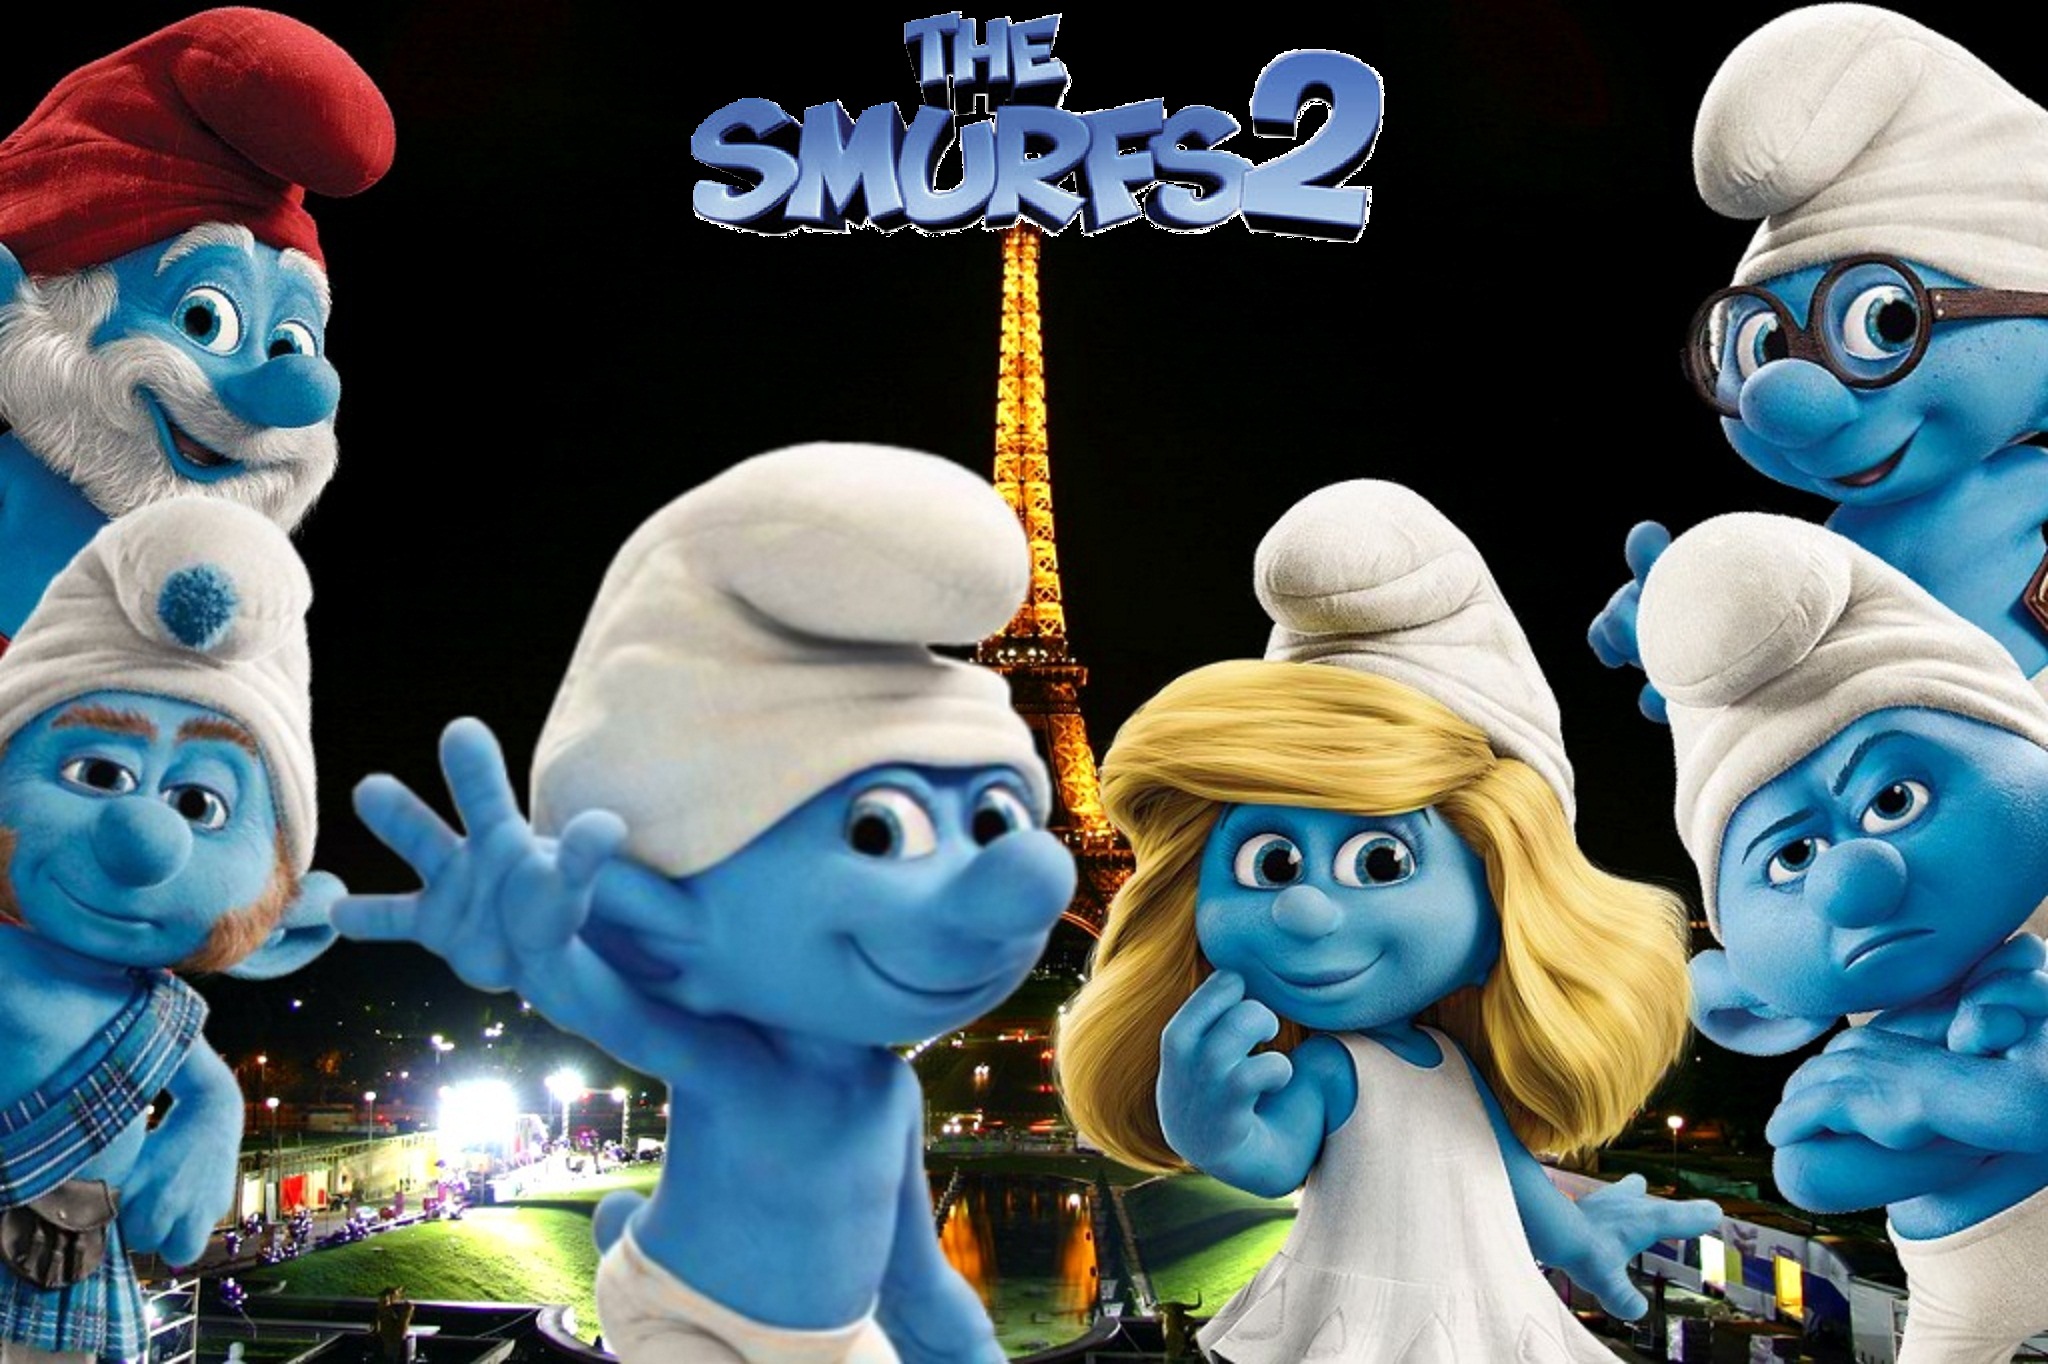 Amazing The Smurfs 2 Pictures & Backgrounds. 